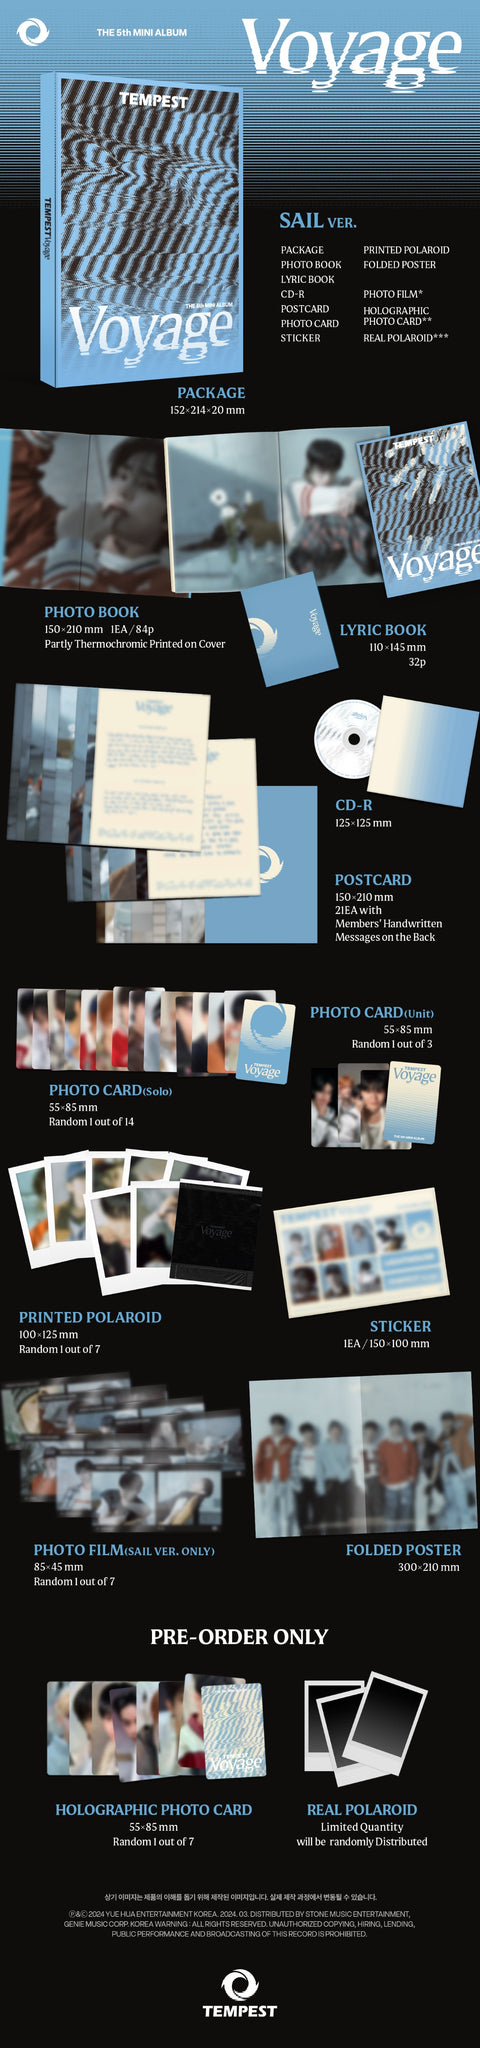 TEMPEST 5th Mini Album TEMPEST Voyage - SAIL Version Inclusions Package, Photobook, Lyric Book, CD, Postcard Set, Photocard, Unit Photocard, Printed Polaroid, Sticker, Photo Film, Folded Poster, Pre-order Only Holographic Photocard, Real Polaroid